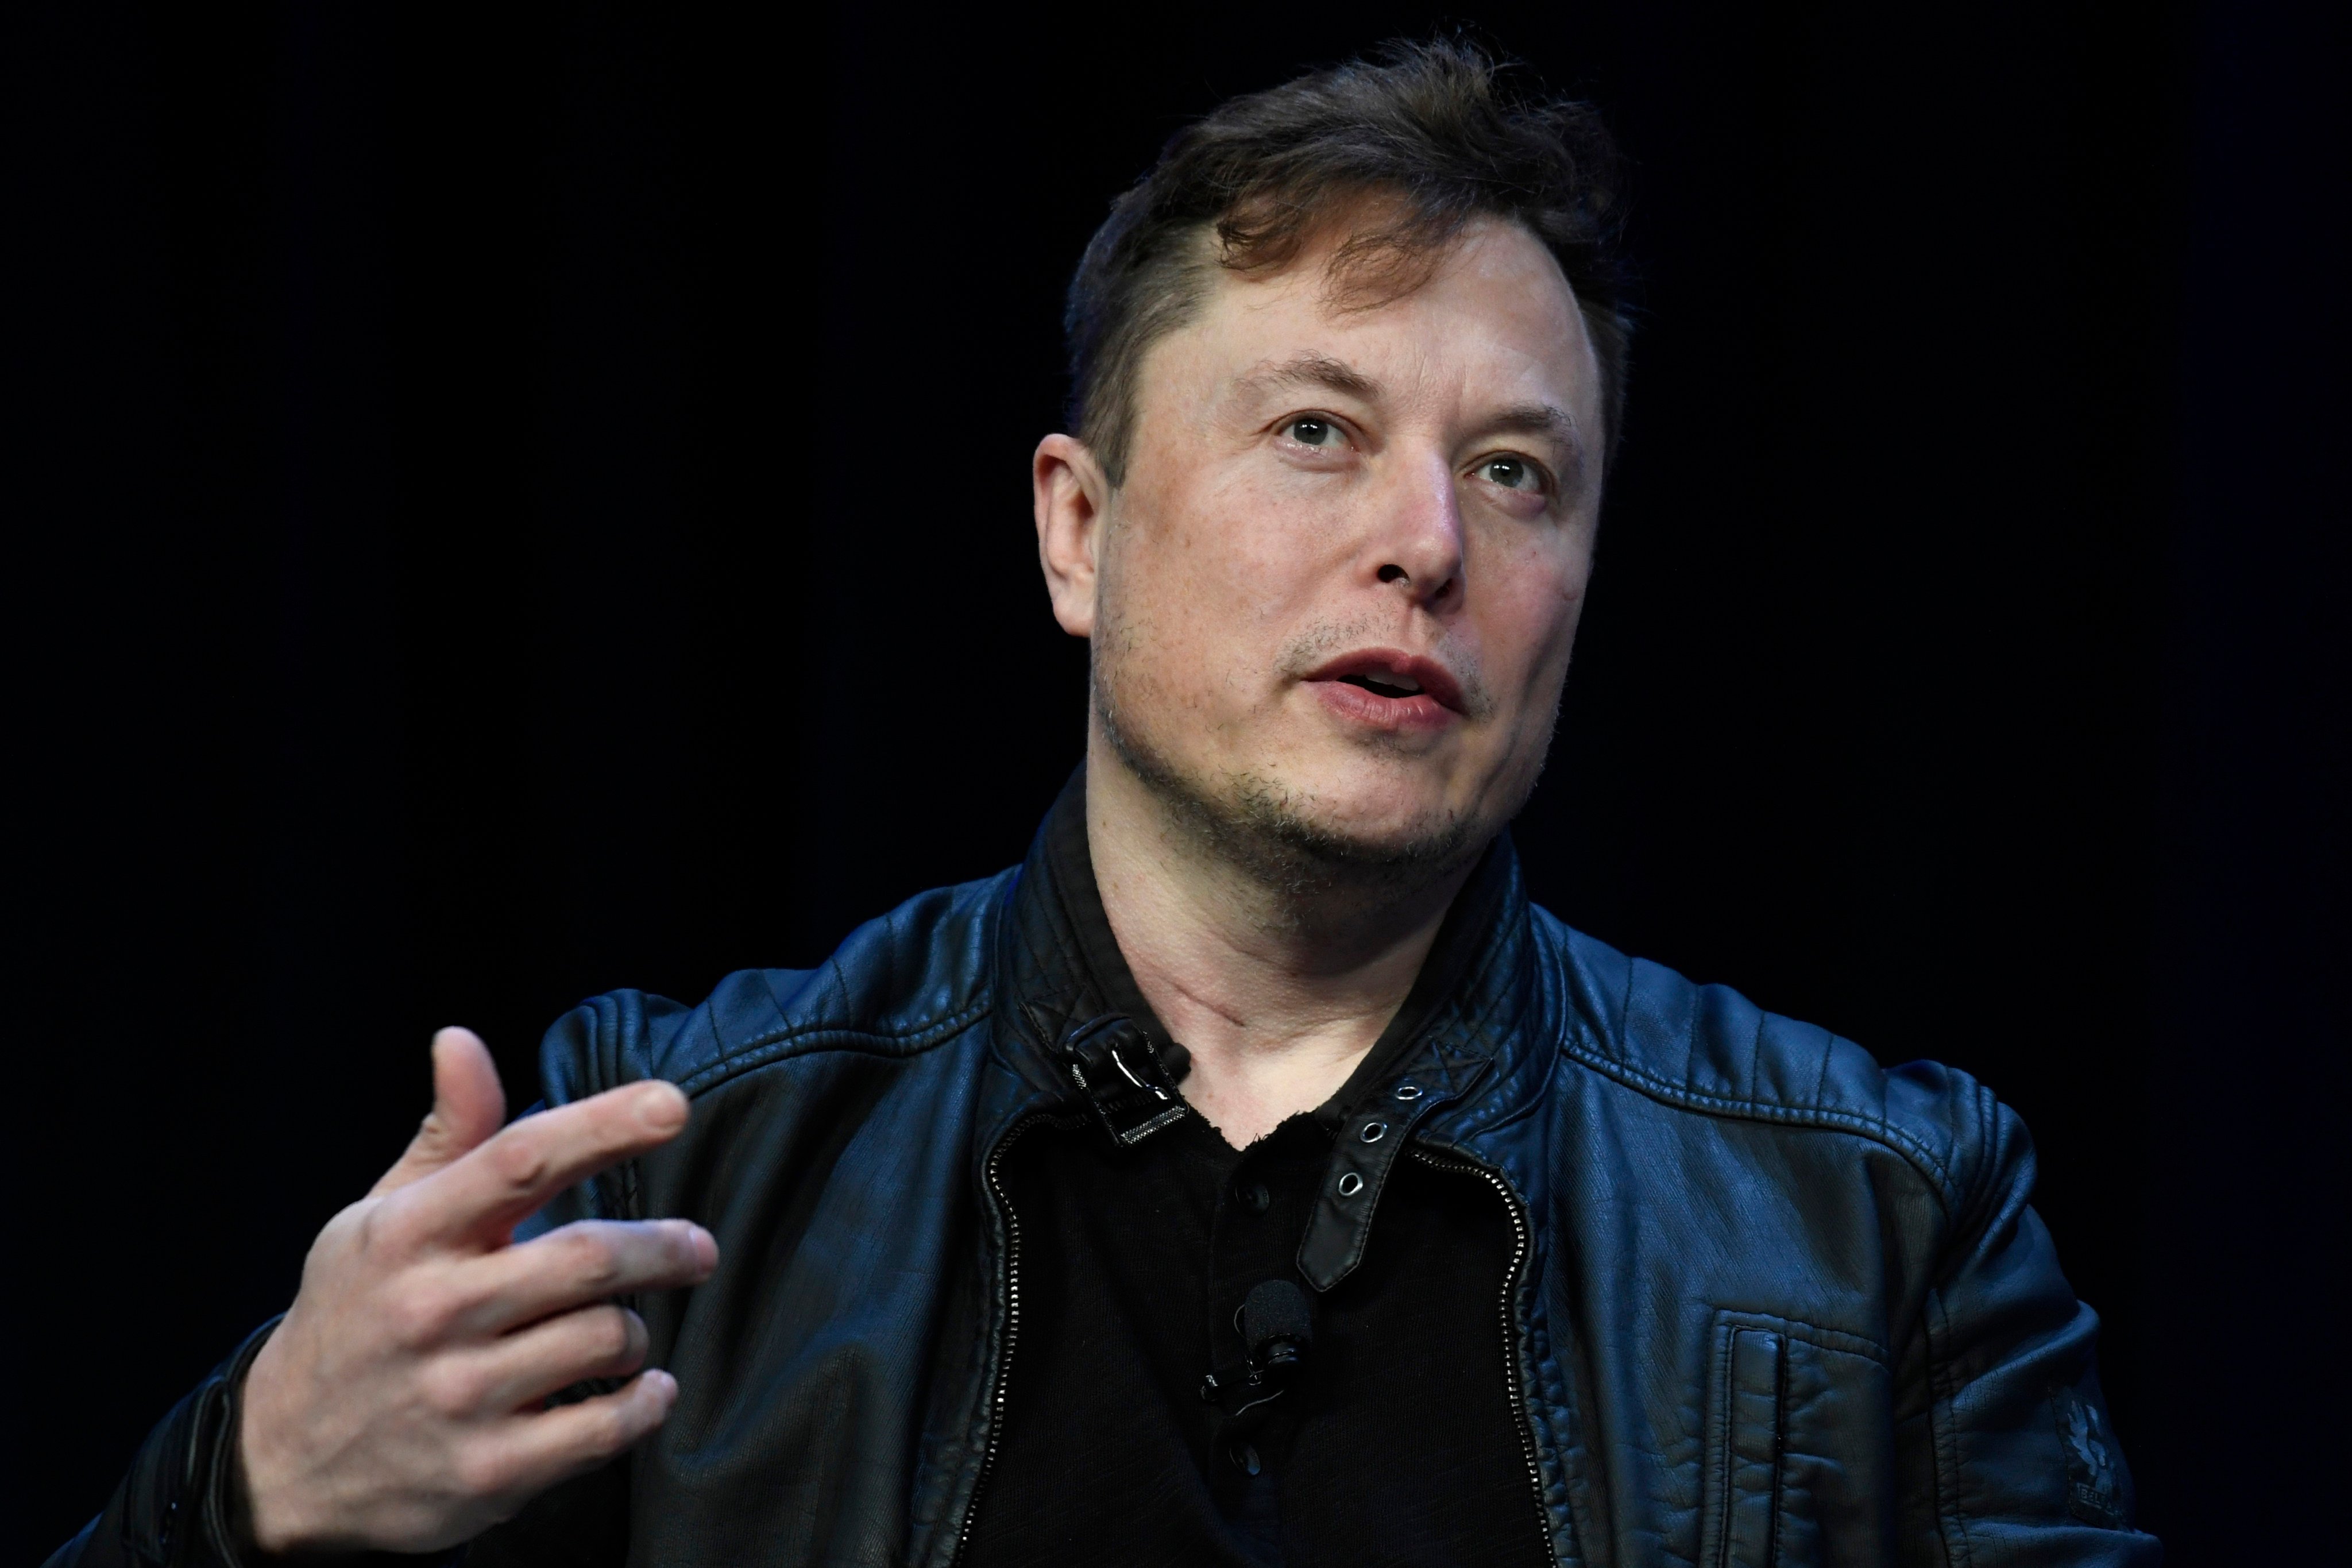 SpaceX CEO Elon Musk recently praised Singapore’s first PM for developing the country’s airport. Photo: AP